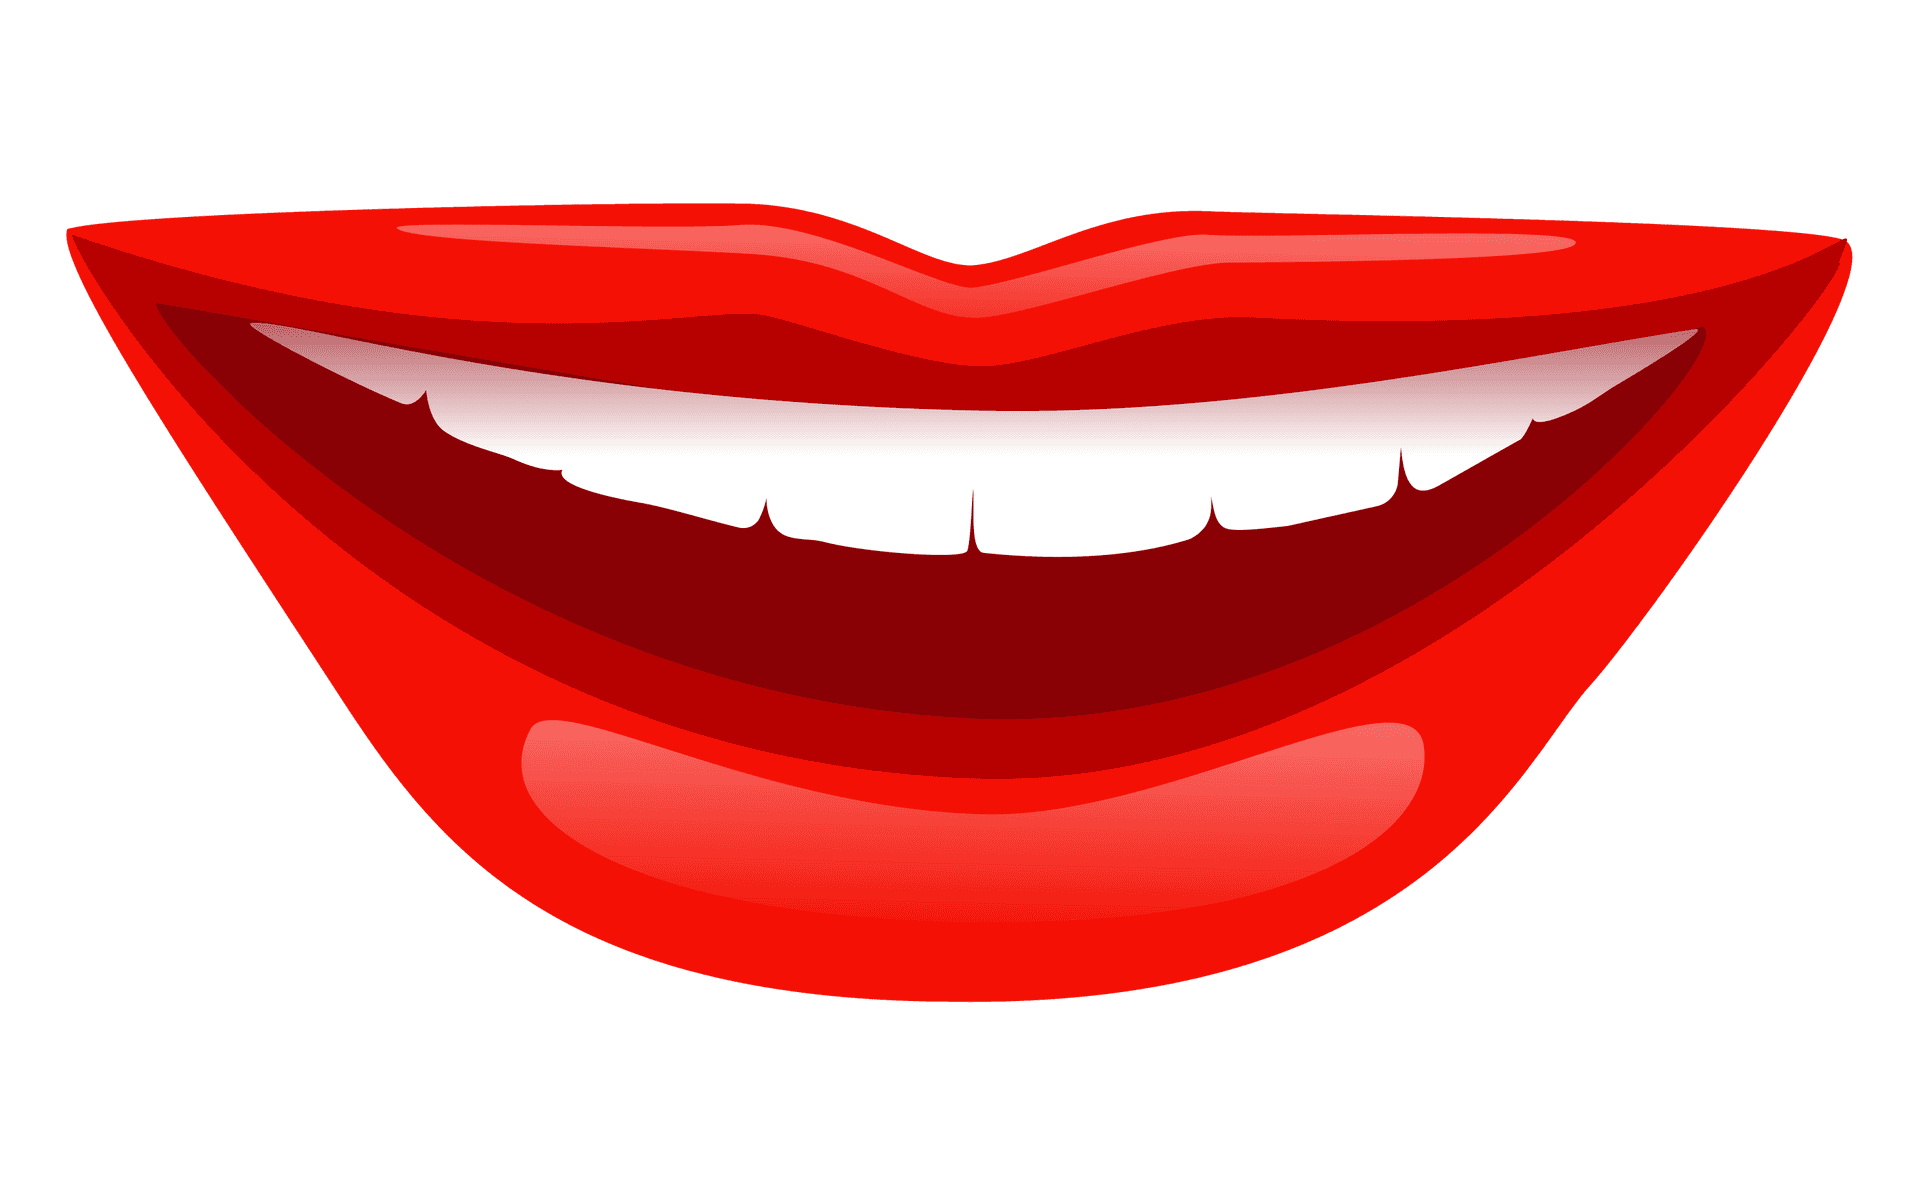 Cartoon Smile Graphic PNG